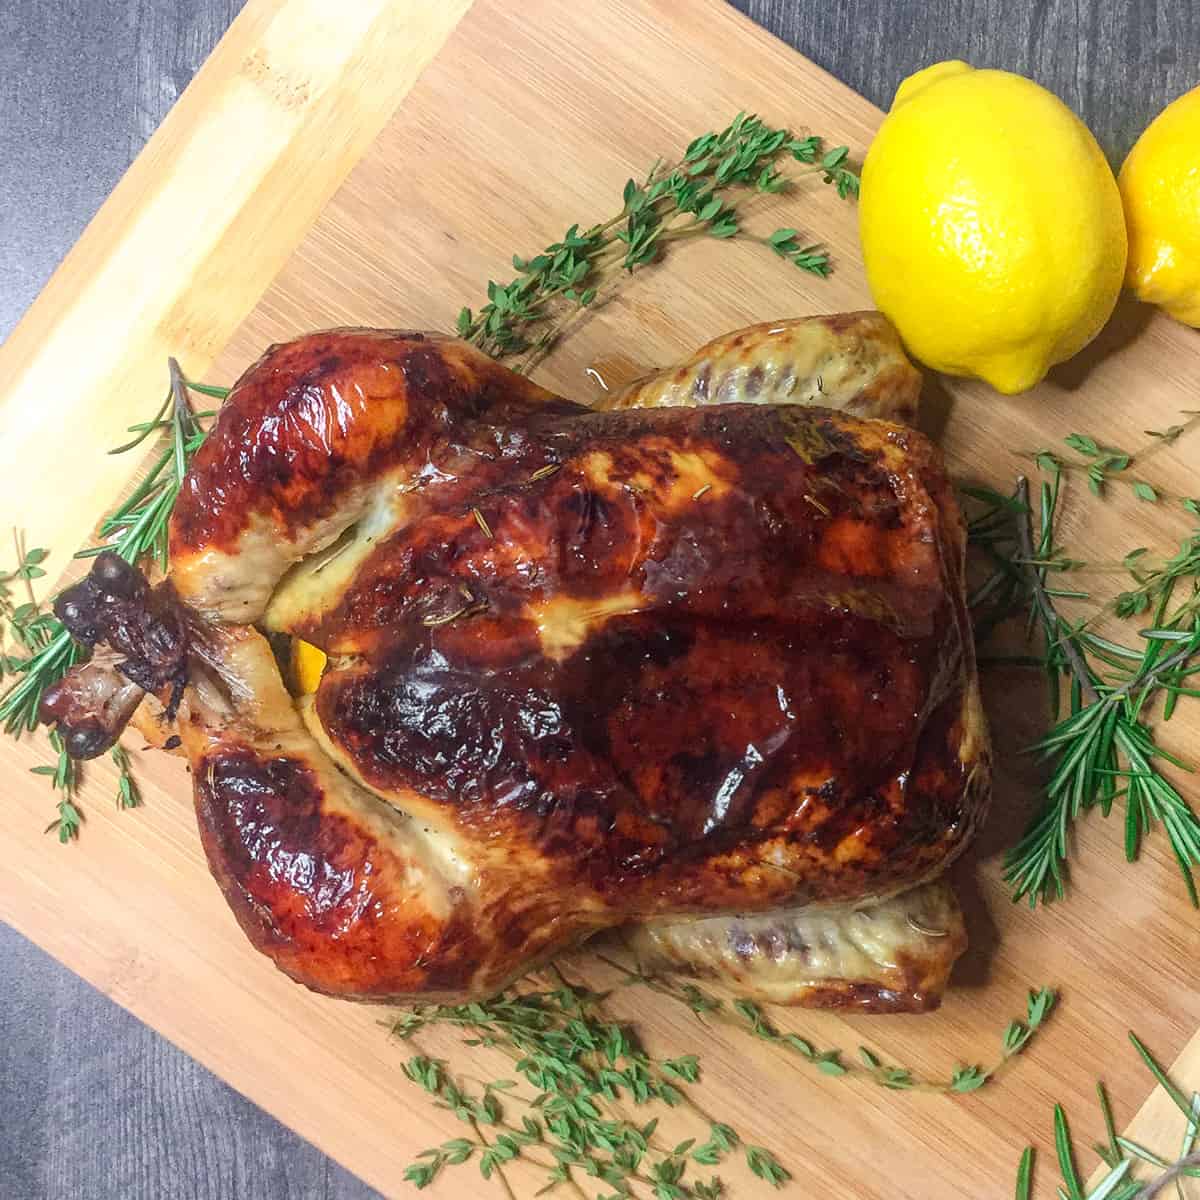 Roasted Chicken on a wood cutting board garnished with fresh herbs and lemons.